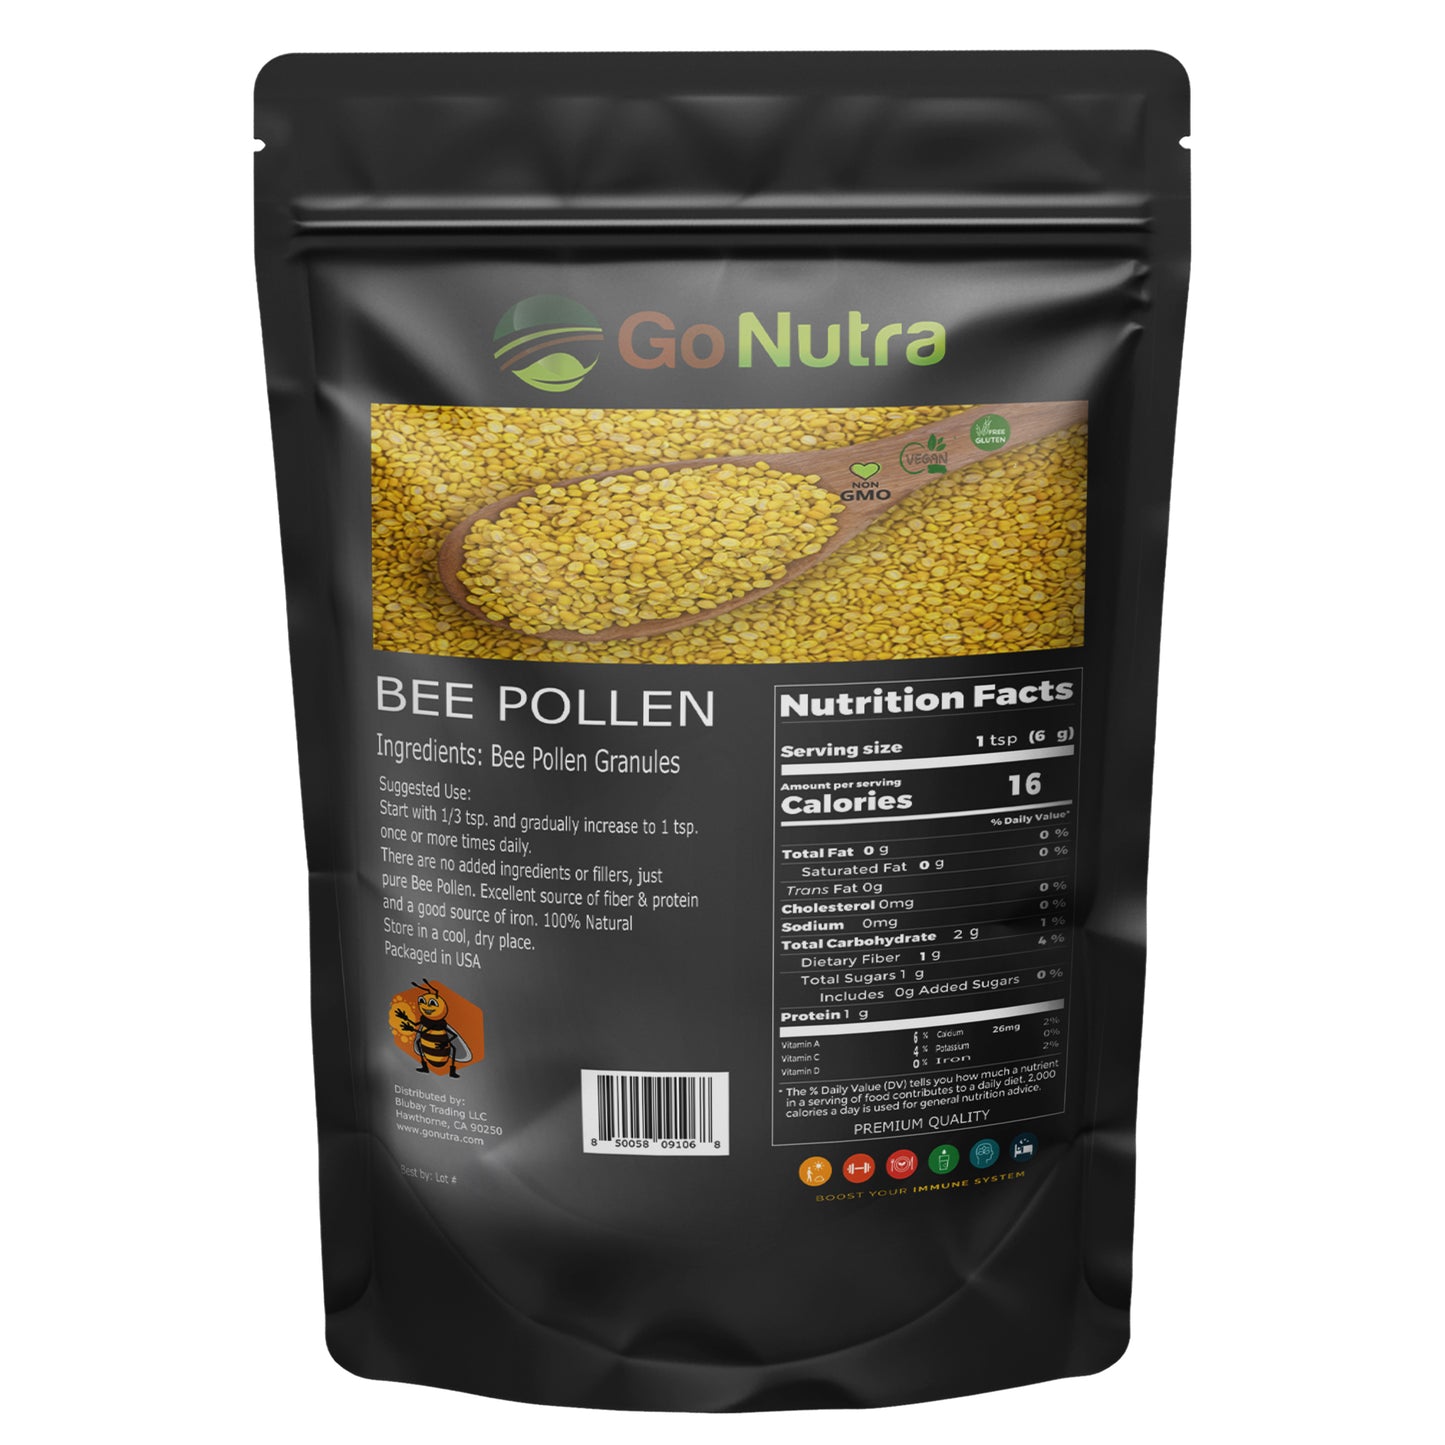 a bag of bee pollen on a white background